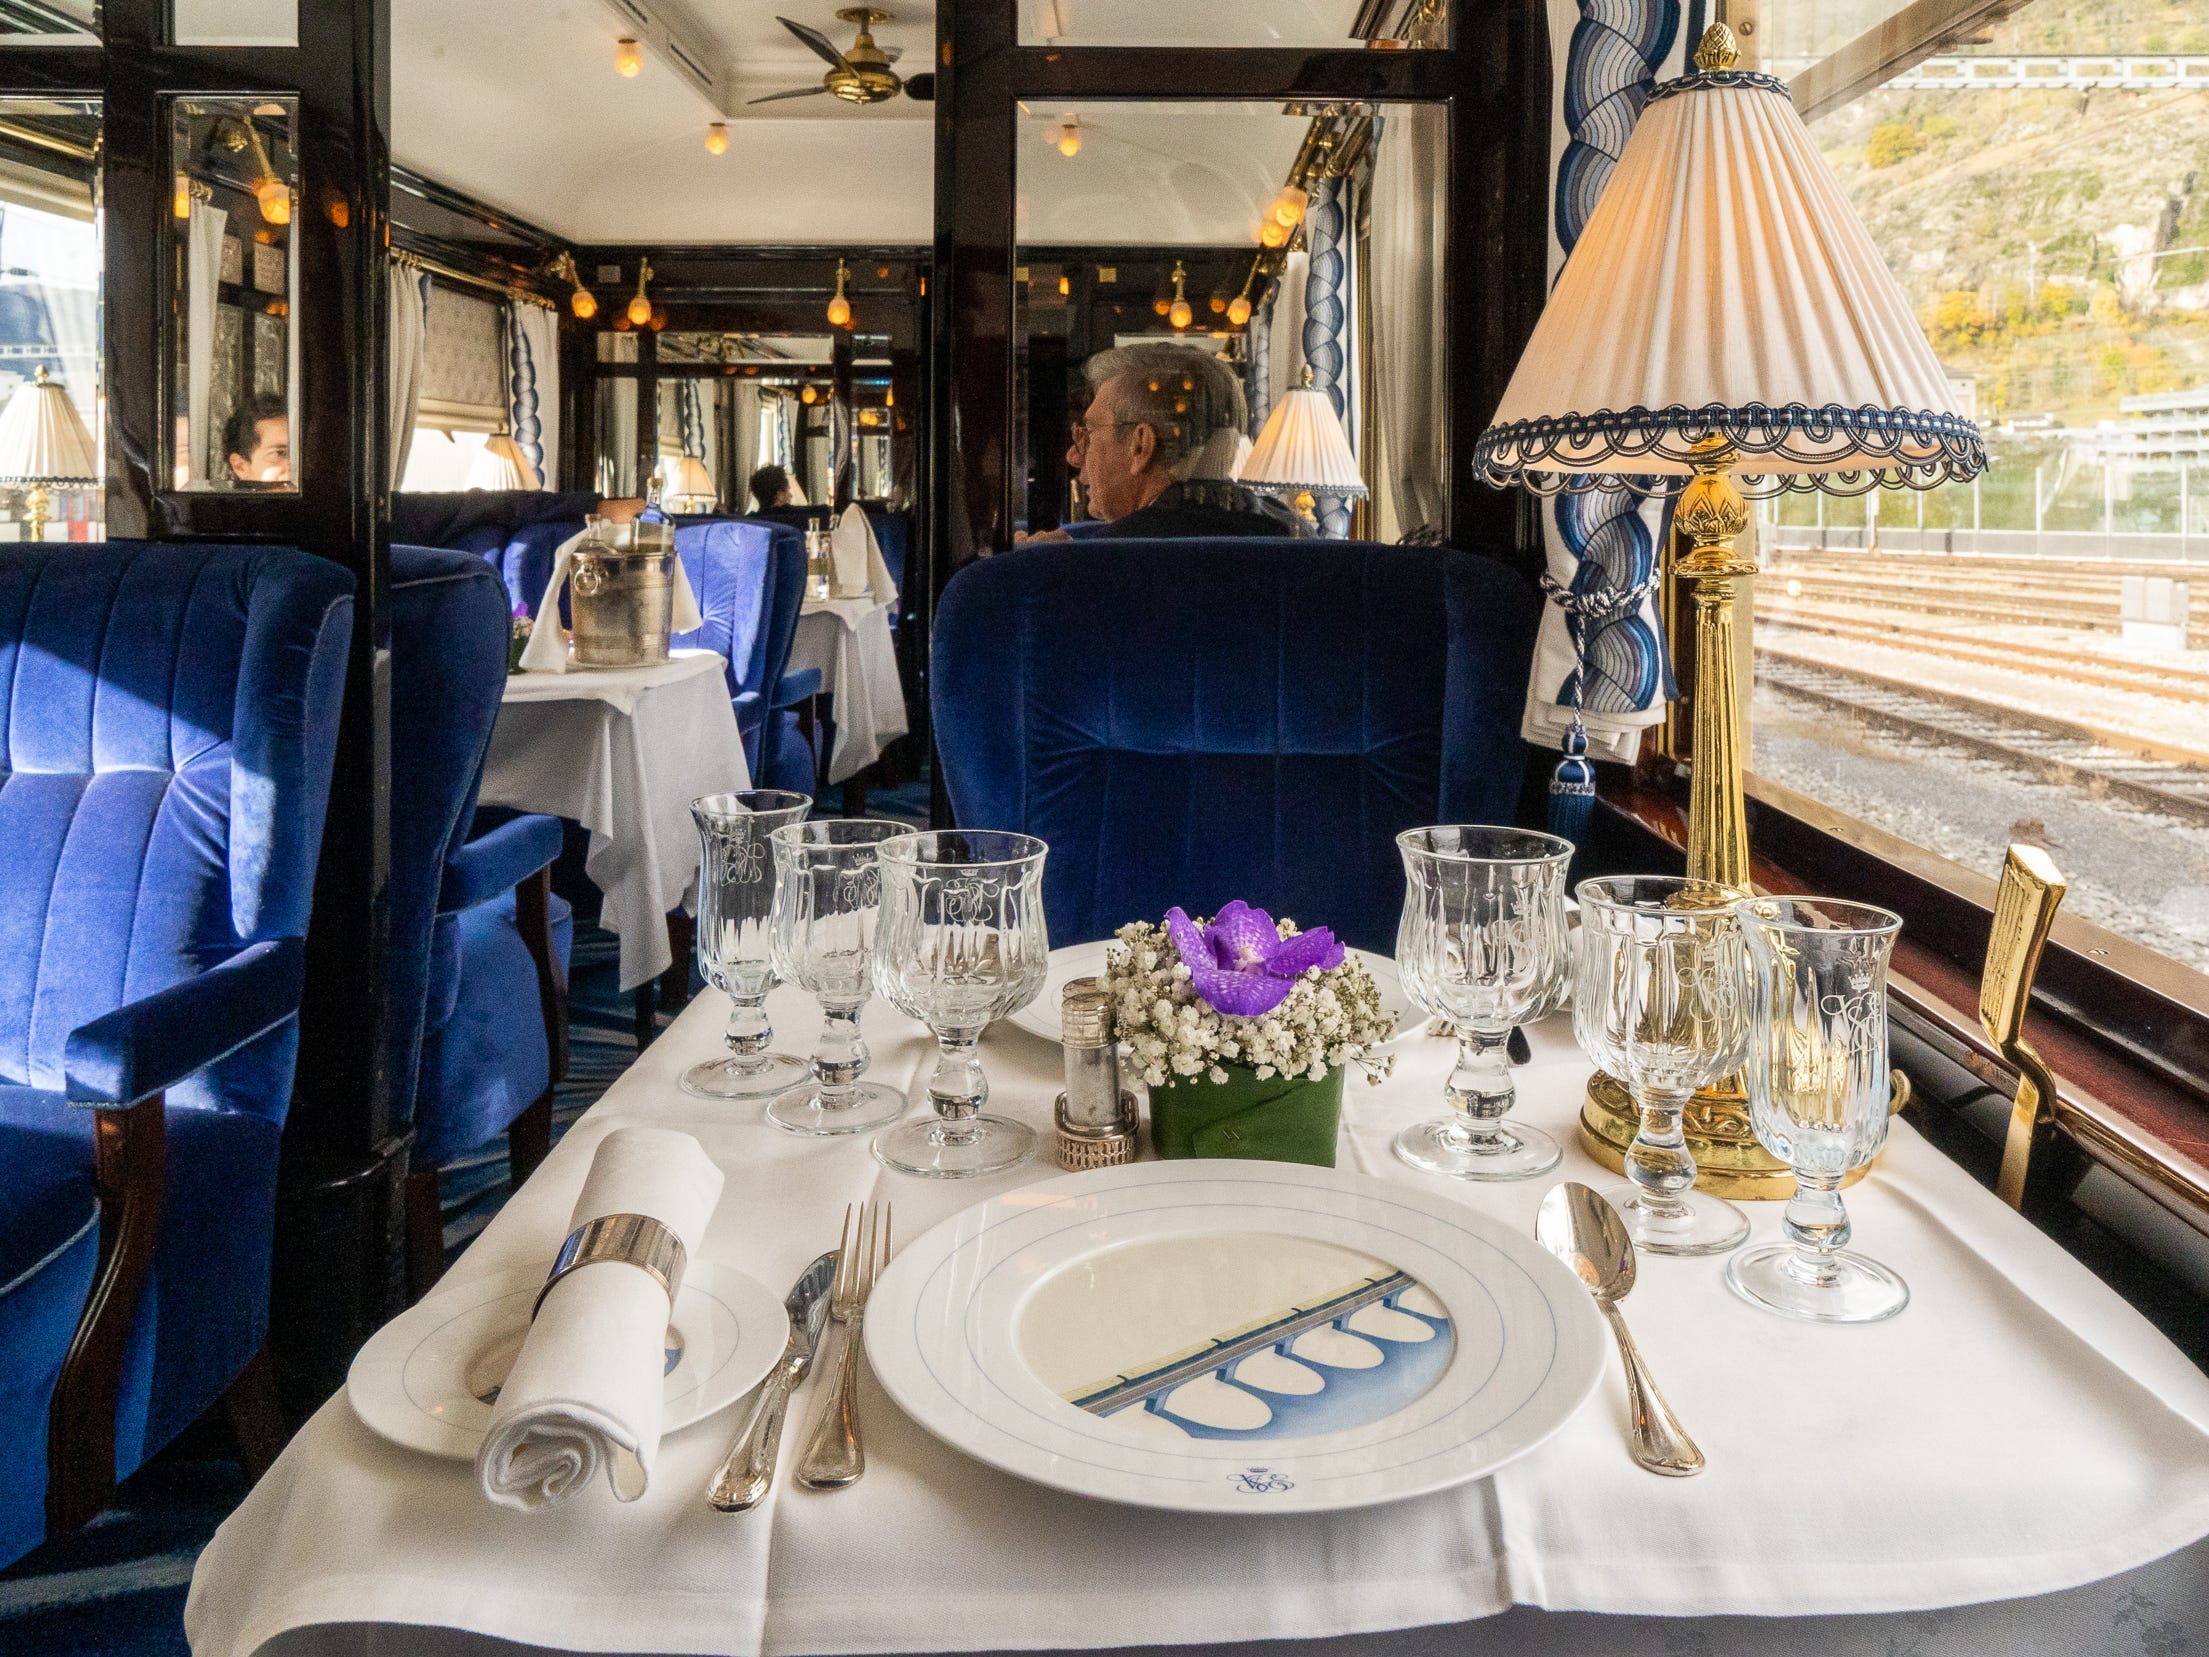 Inside a train dining car with velvet, blue seats, and tables with white cloths, dishes, and silverware